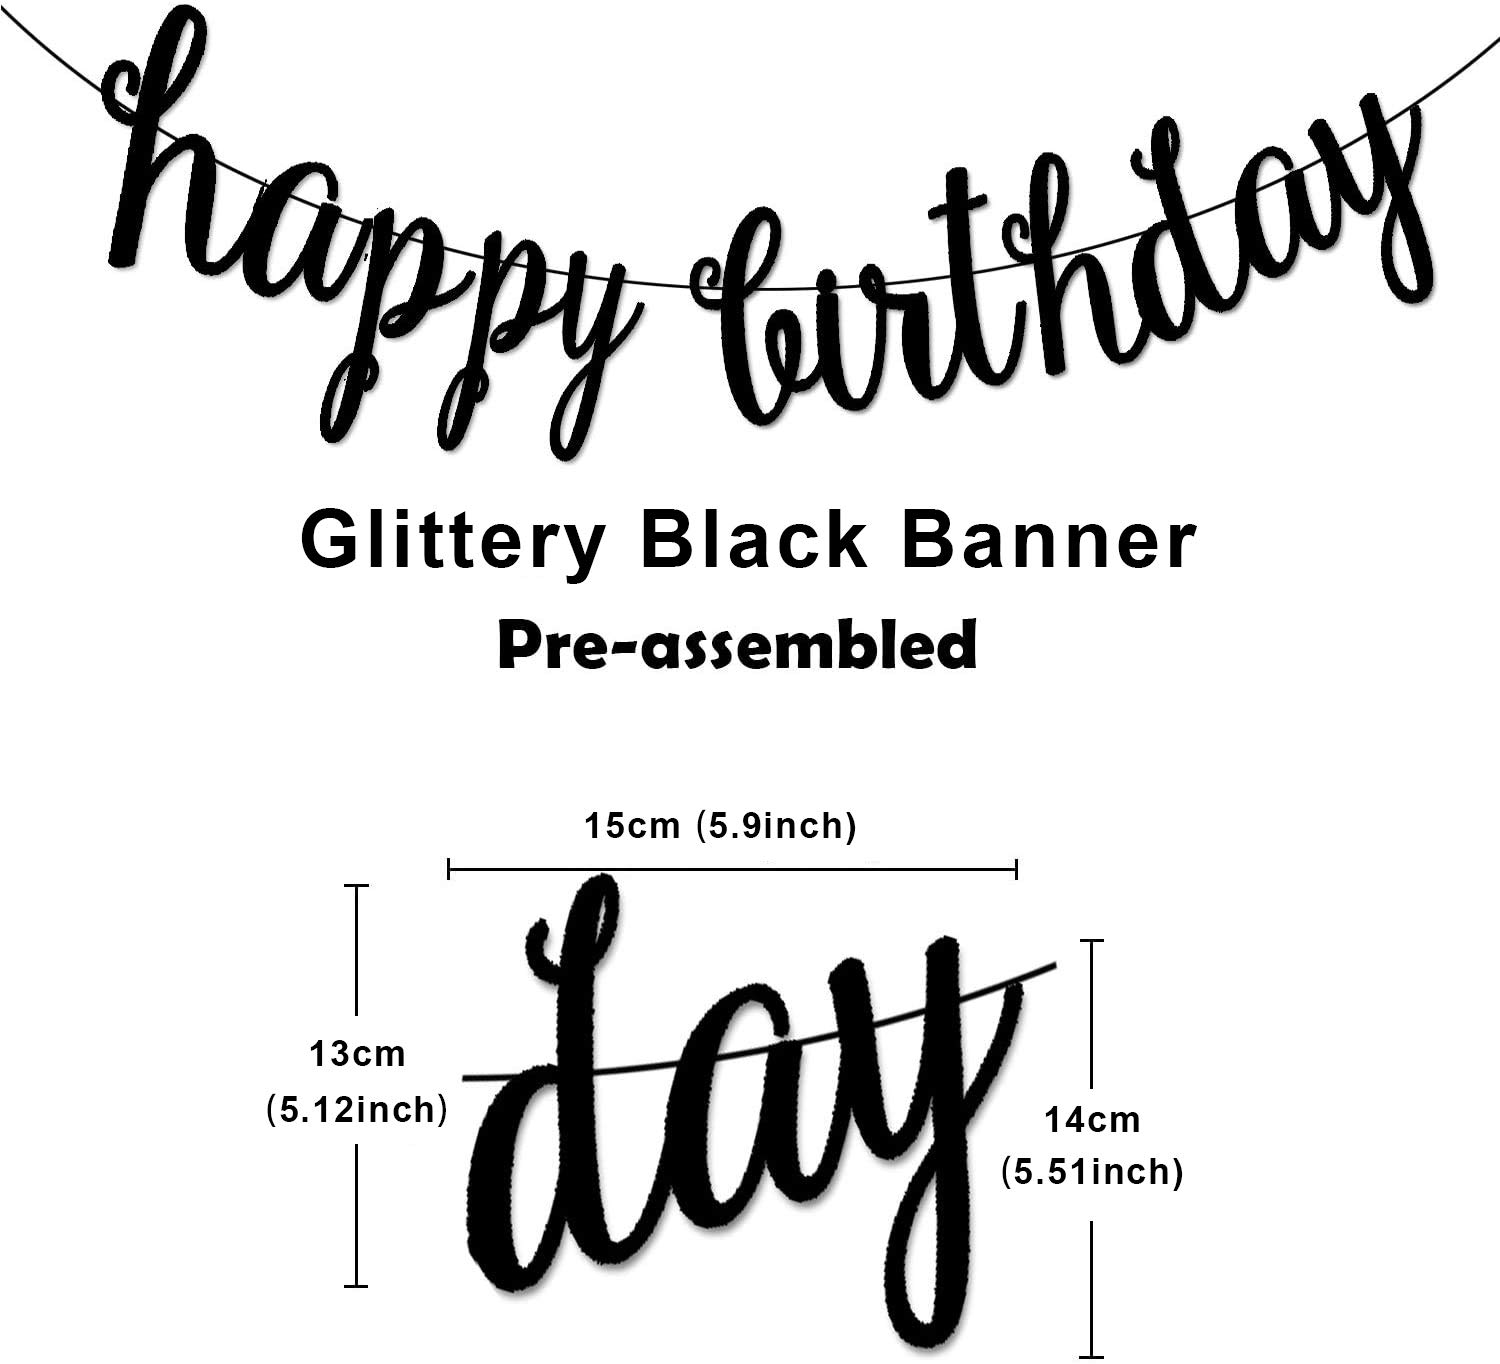 Black Happy Birthday Banner Decoration Kit, Black Glittery Birthday Banner Circle Dots Garland with Black Silver Hanging Swirls for Birthday Baby Shower Party Decorations Supplies, Pre-Strung